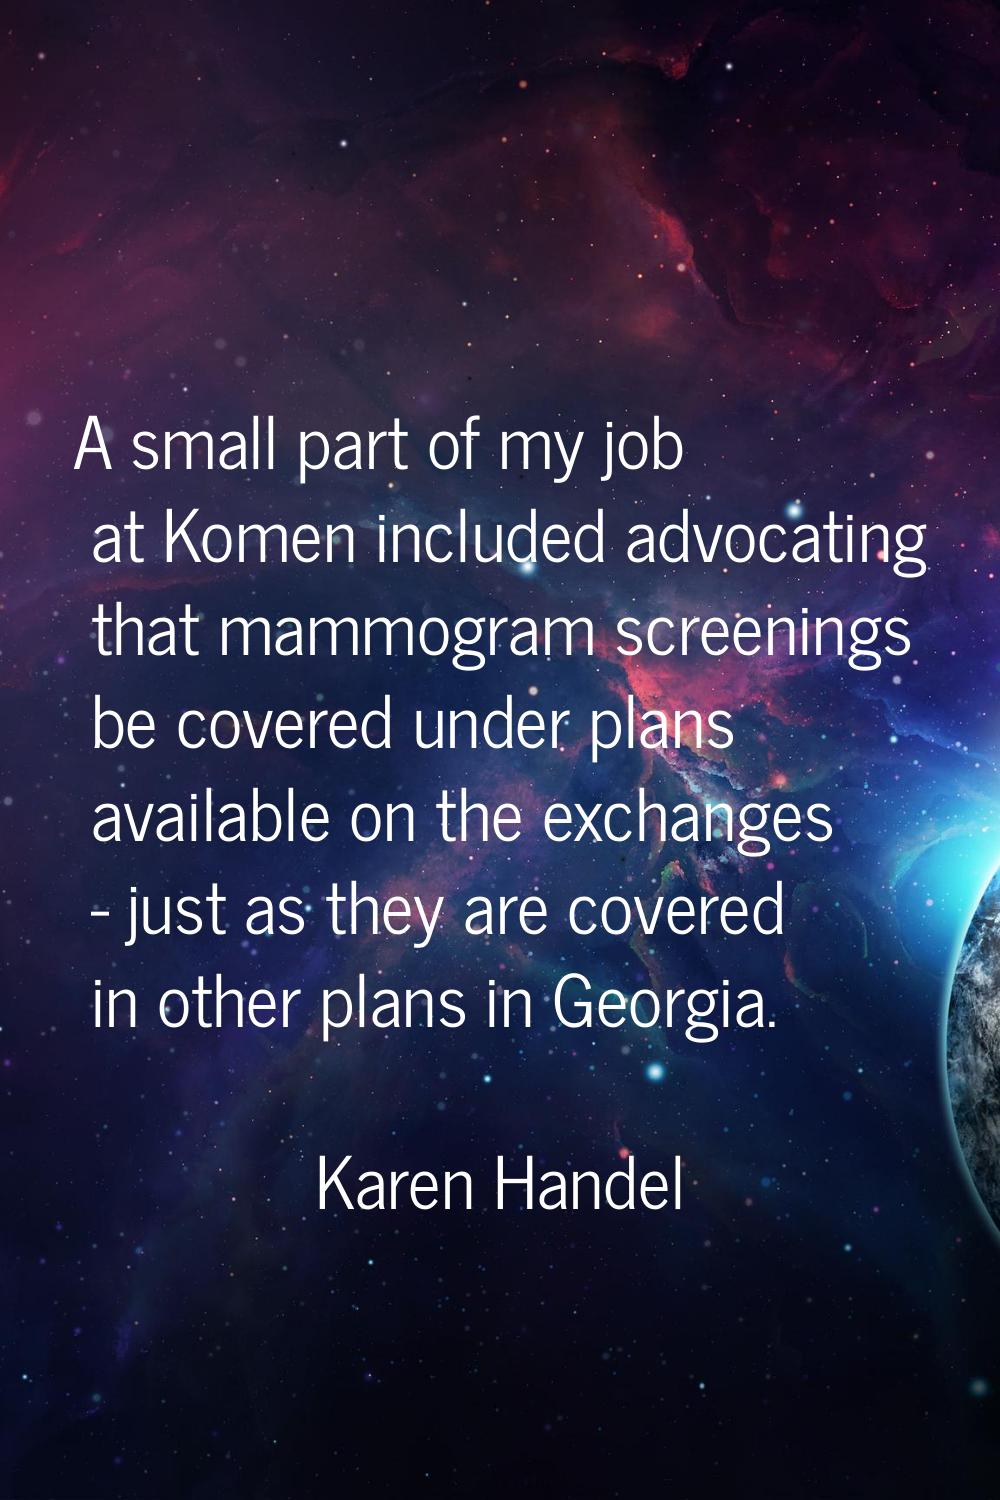 A small part of my job at Komen included advocating that mammogram screenings be covered under plan